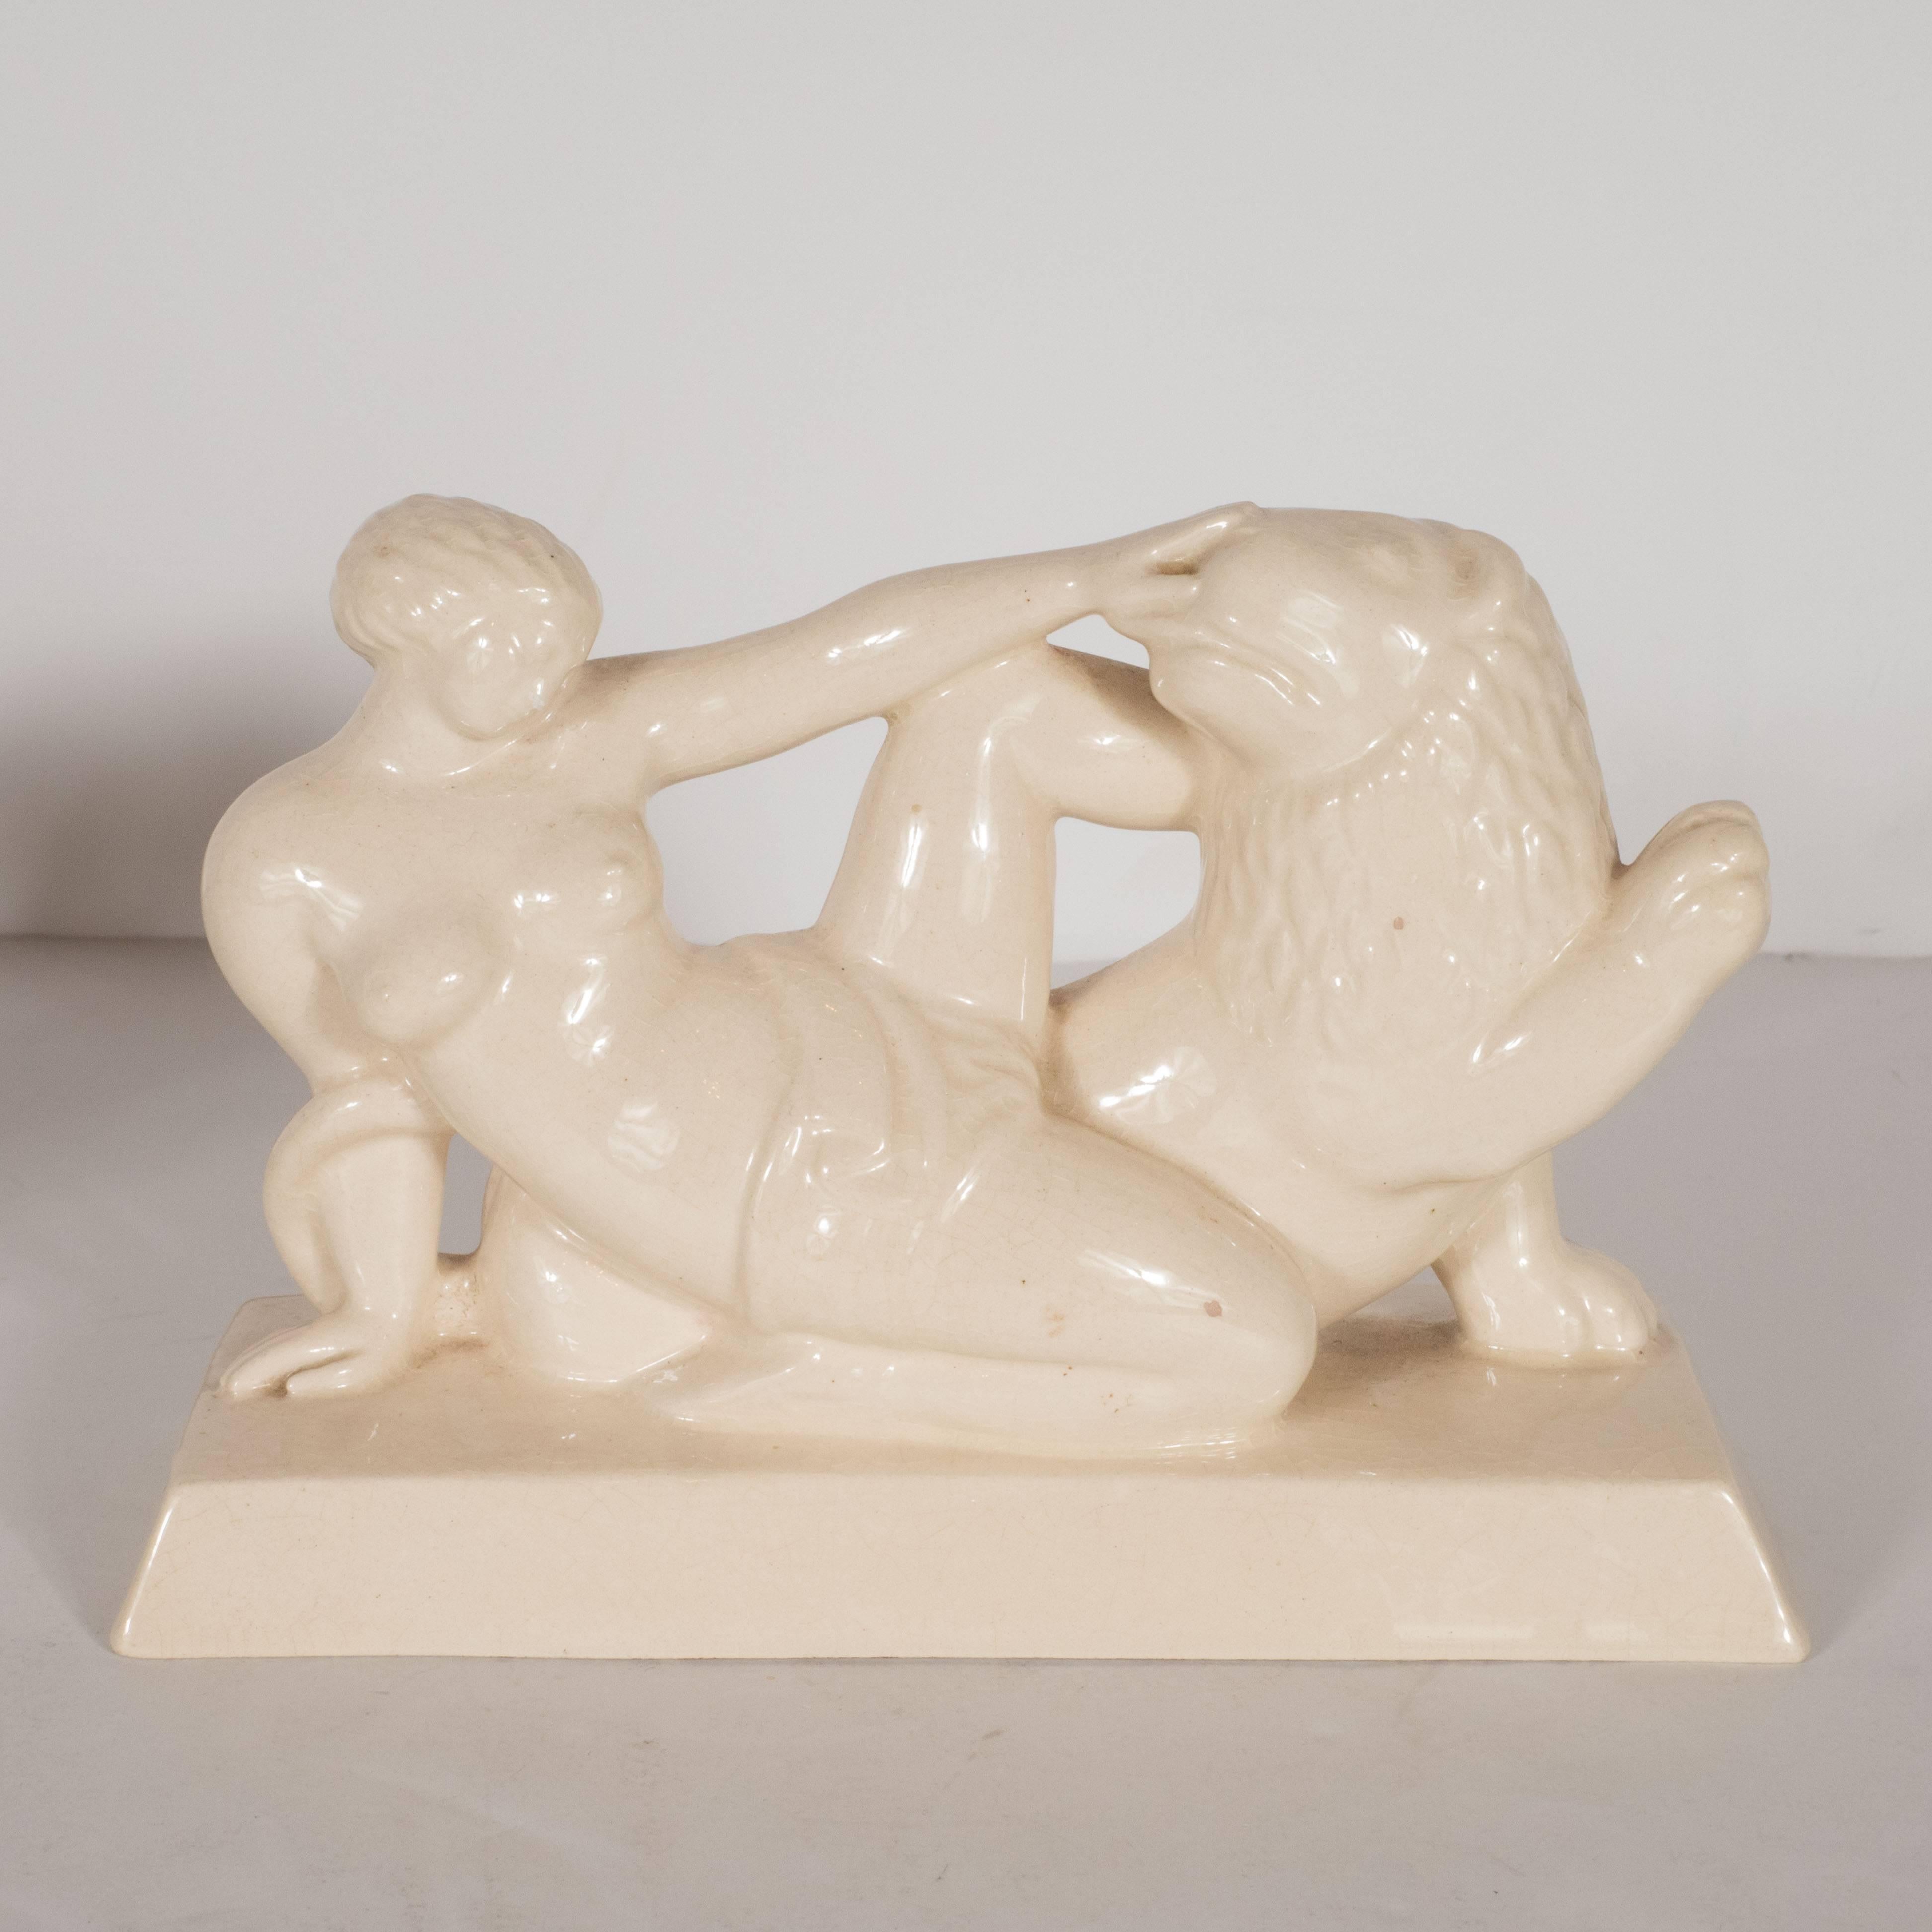 Glazed Art Deco Ceramic Book Ends Featuring Lion and Nude Female Figure For Sale